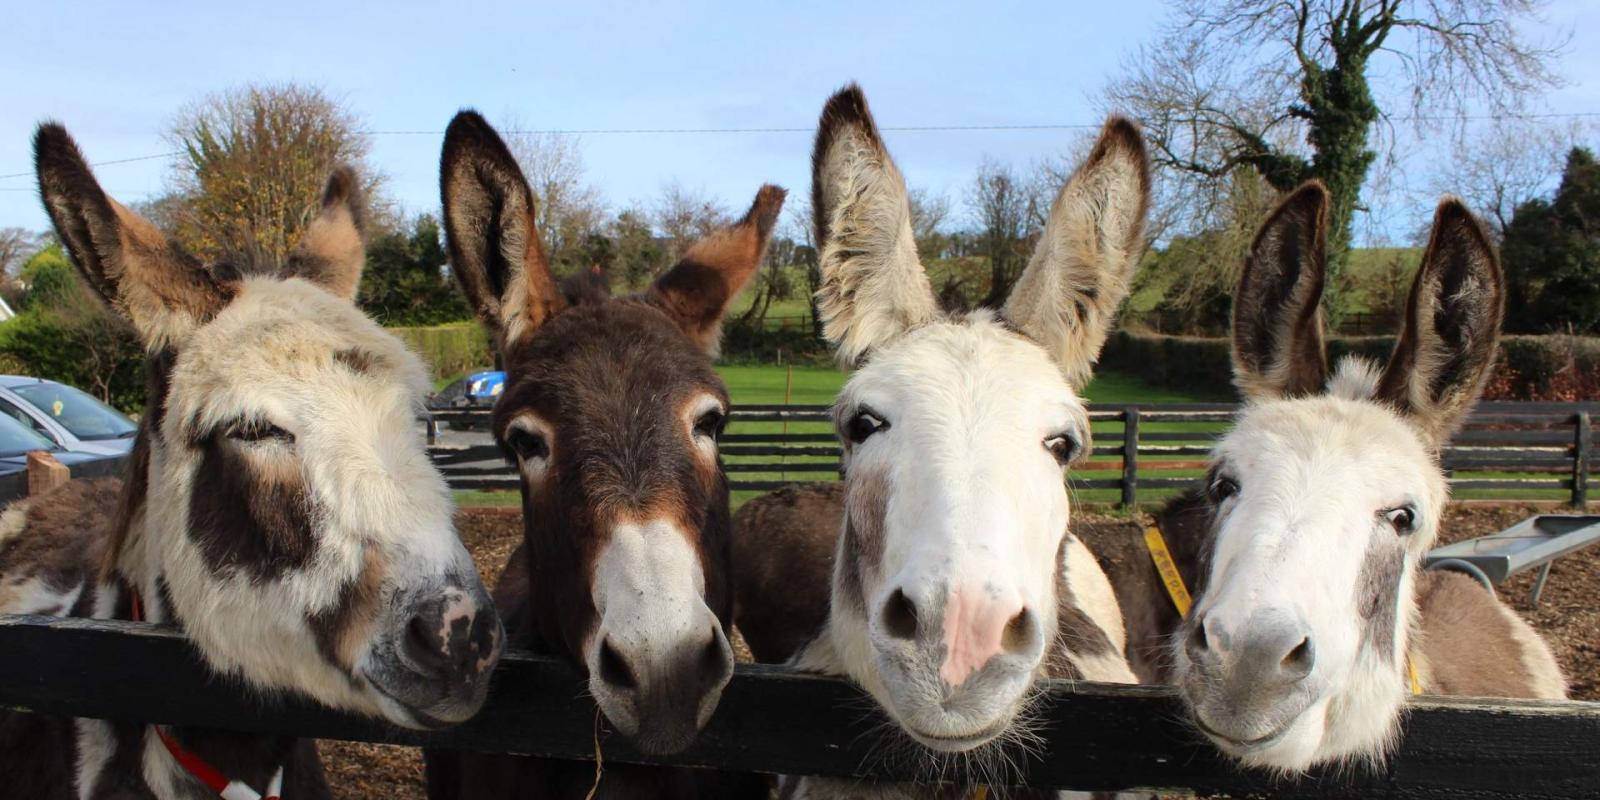 Four donkeys looking over a fence